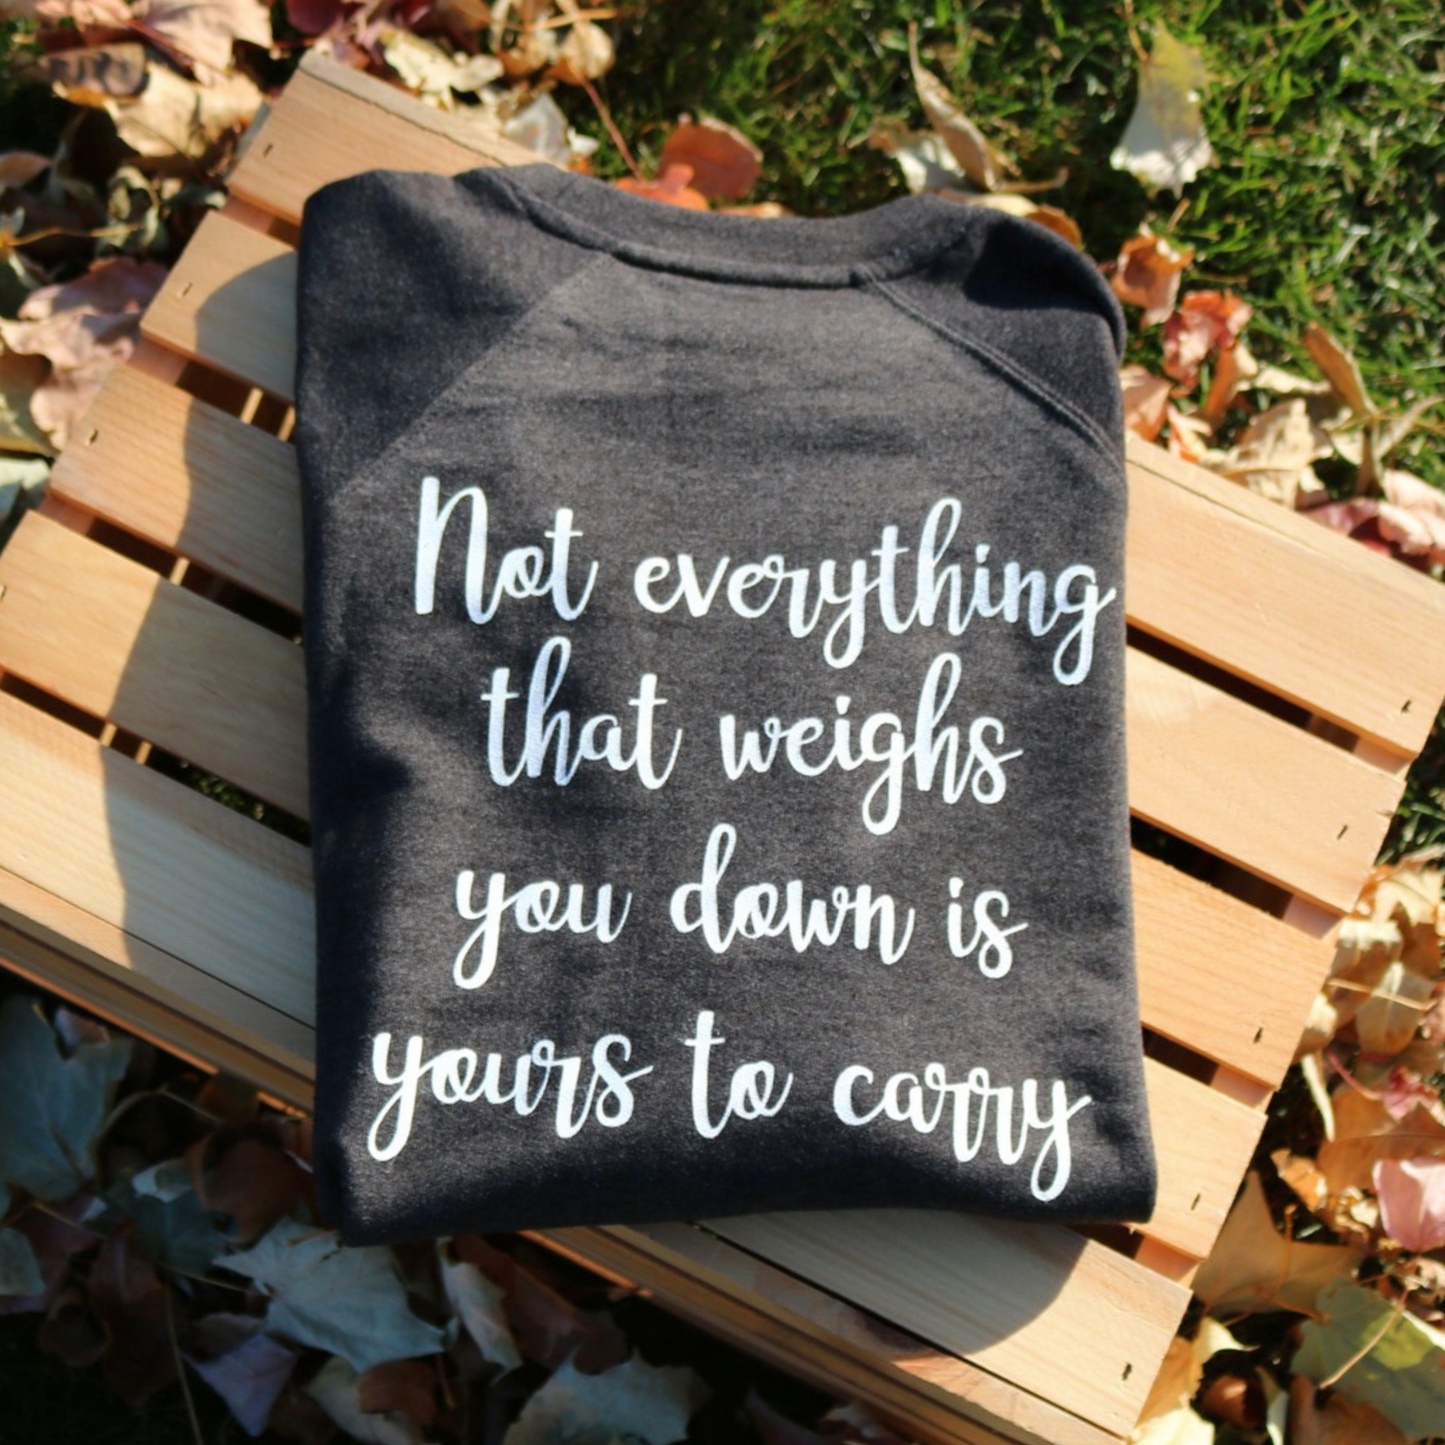 Not Everything That Weighs You Down - Pull Over Sweatshirt in charcoal gray. The back has a white cursive saying of "not everything that weighs you down is yours to carry" with the front corner pocket saying in a cursive font in white of "keep smiling". This is the back view of the sweatshirt, folded on a wooden crate with leaves around it.